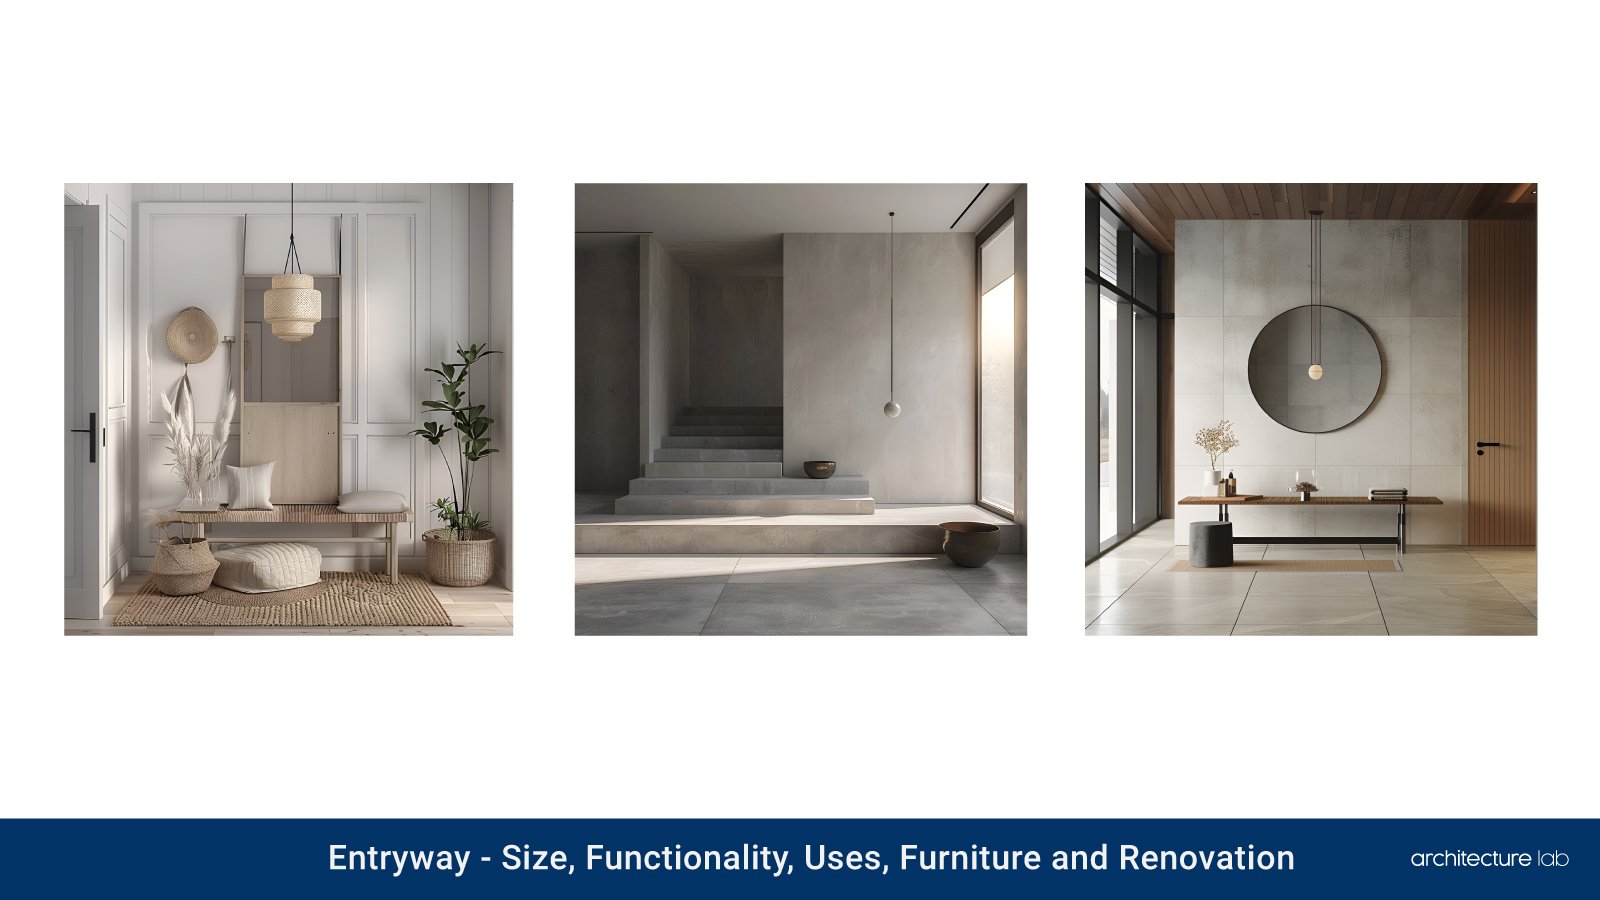 Entryway: size, functionality, uses, furniture and renovation